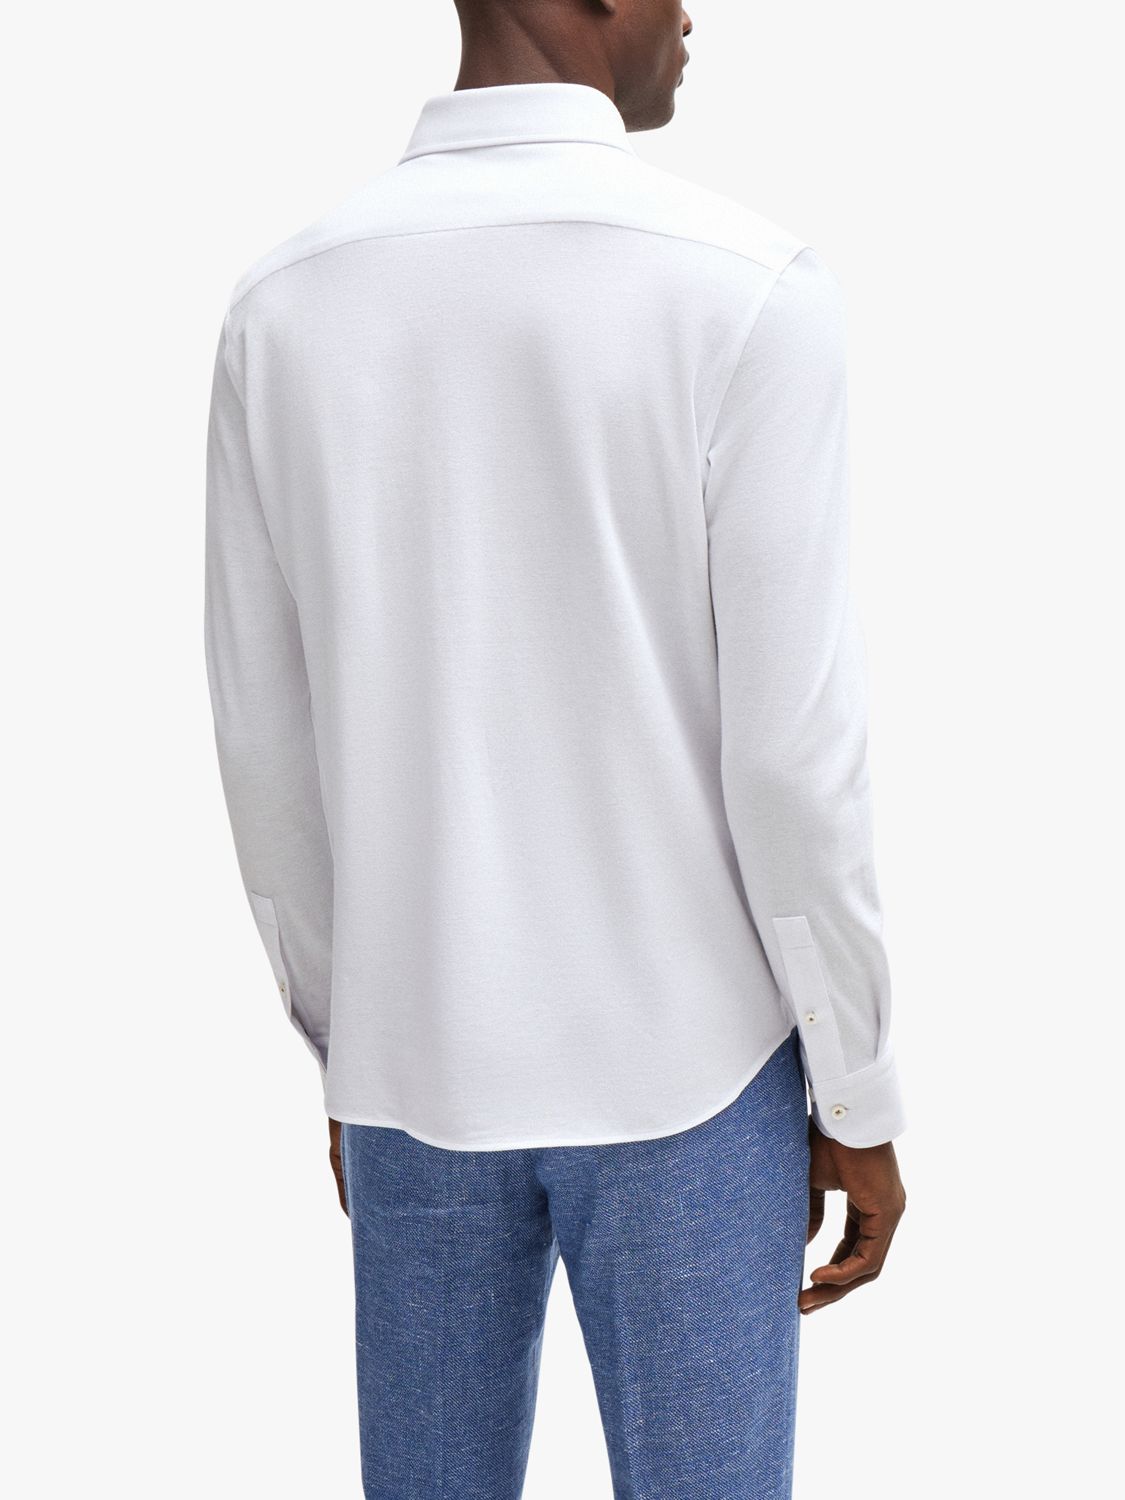 BOSS Casual Fit Long Sleeve Shirt, White, 15